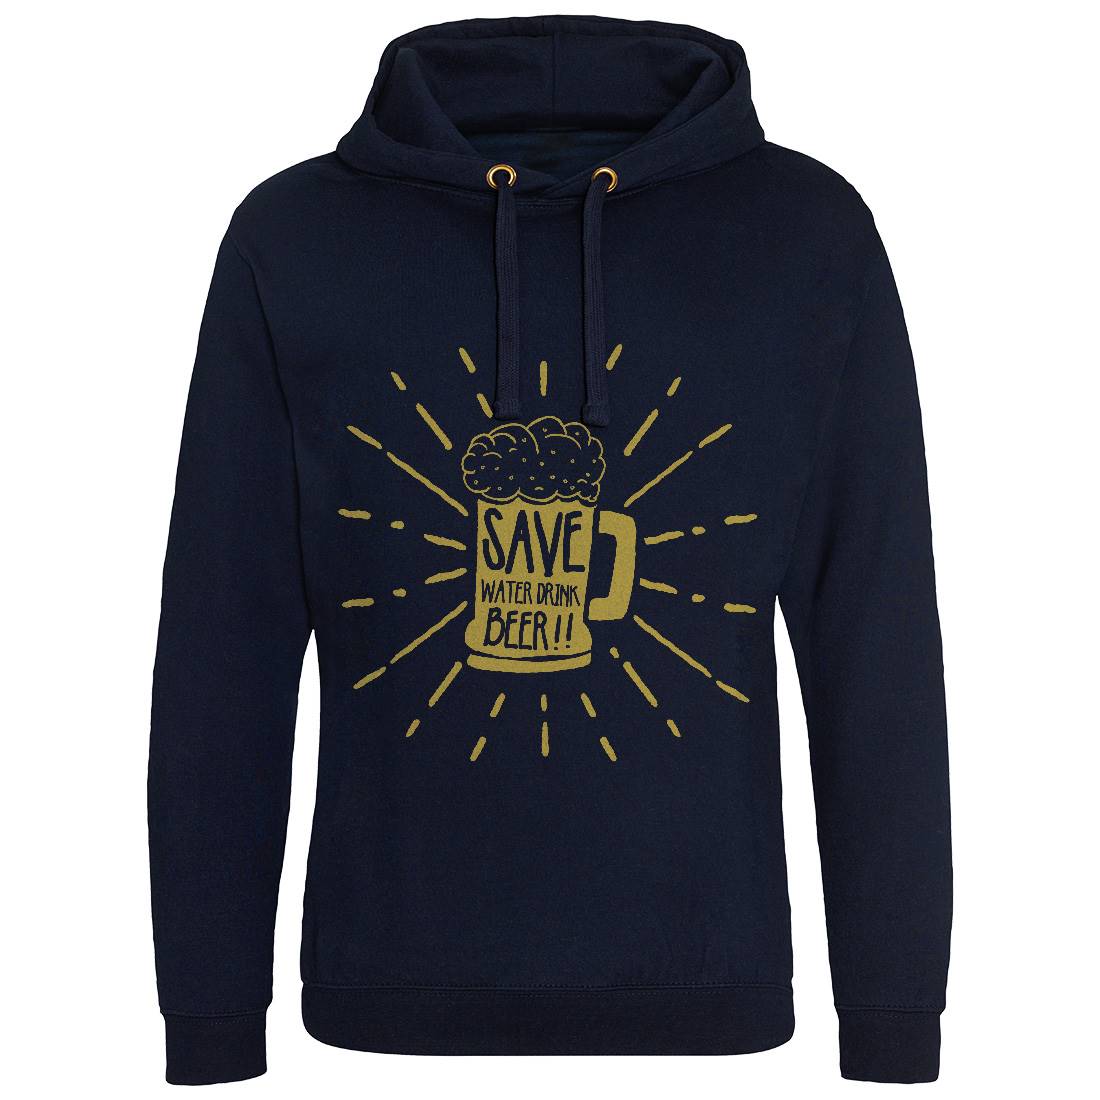 Save Water Mens Hoodie Without Pocket Drinks A368